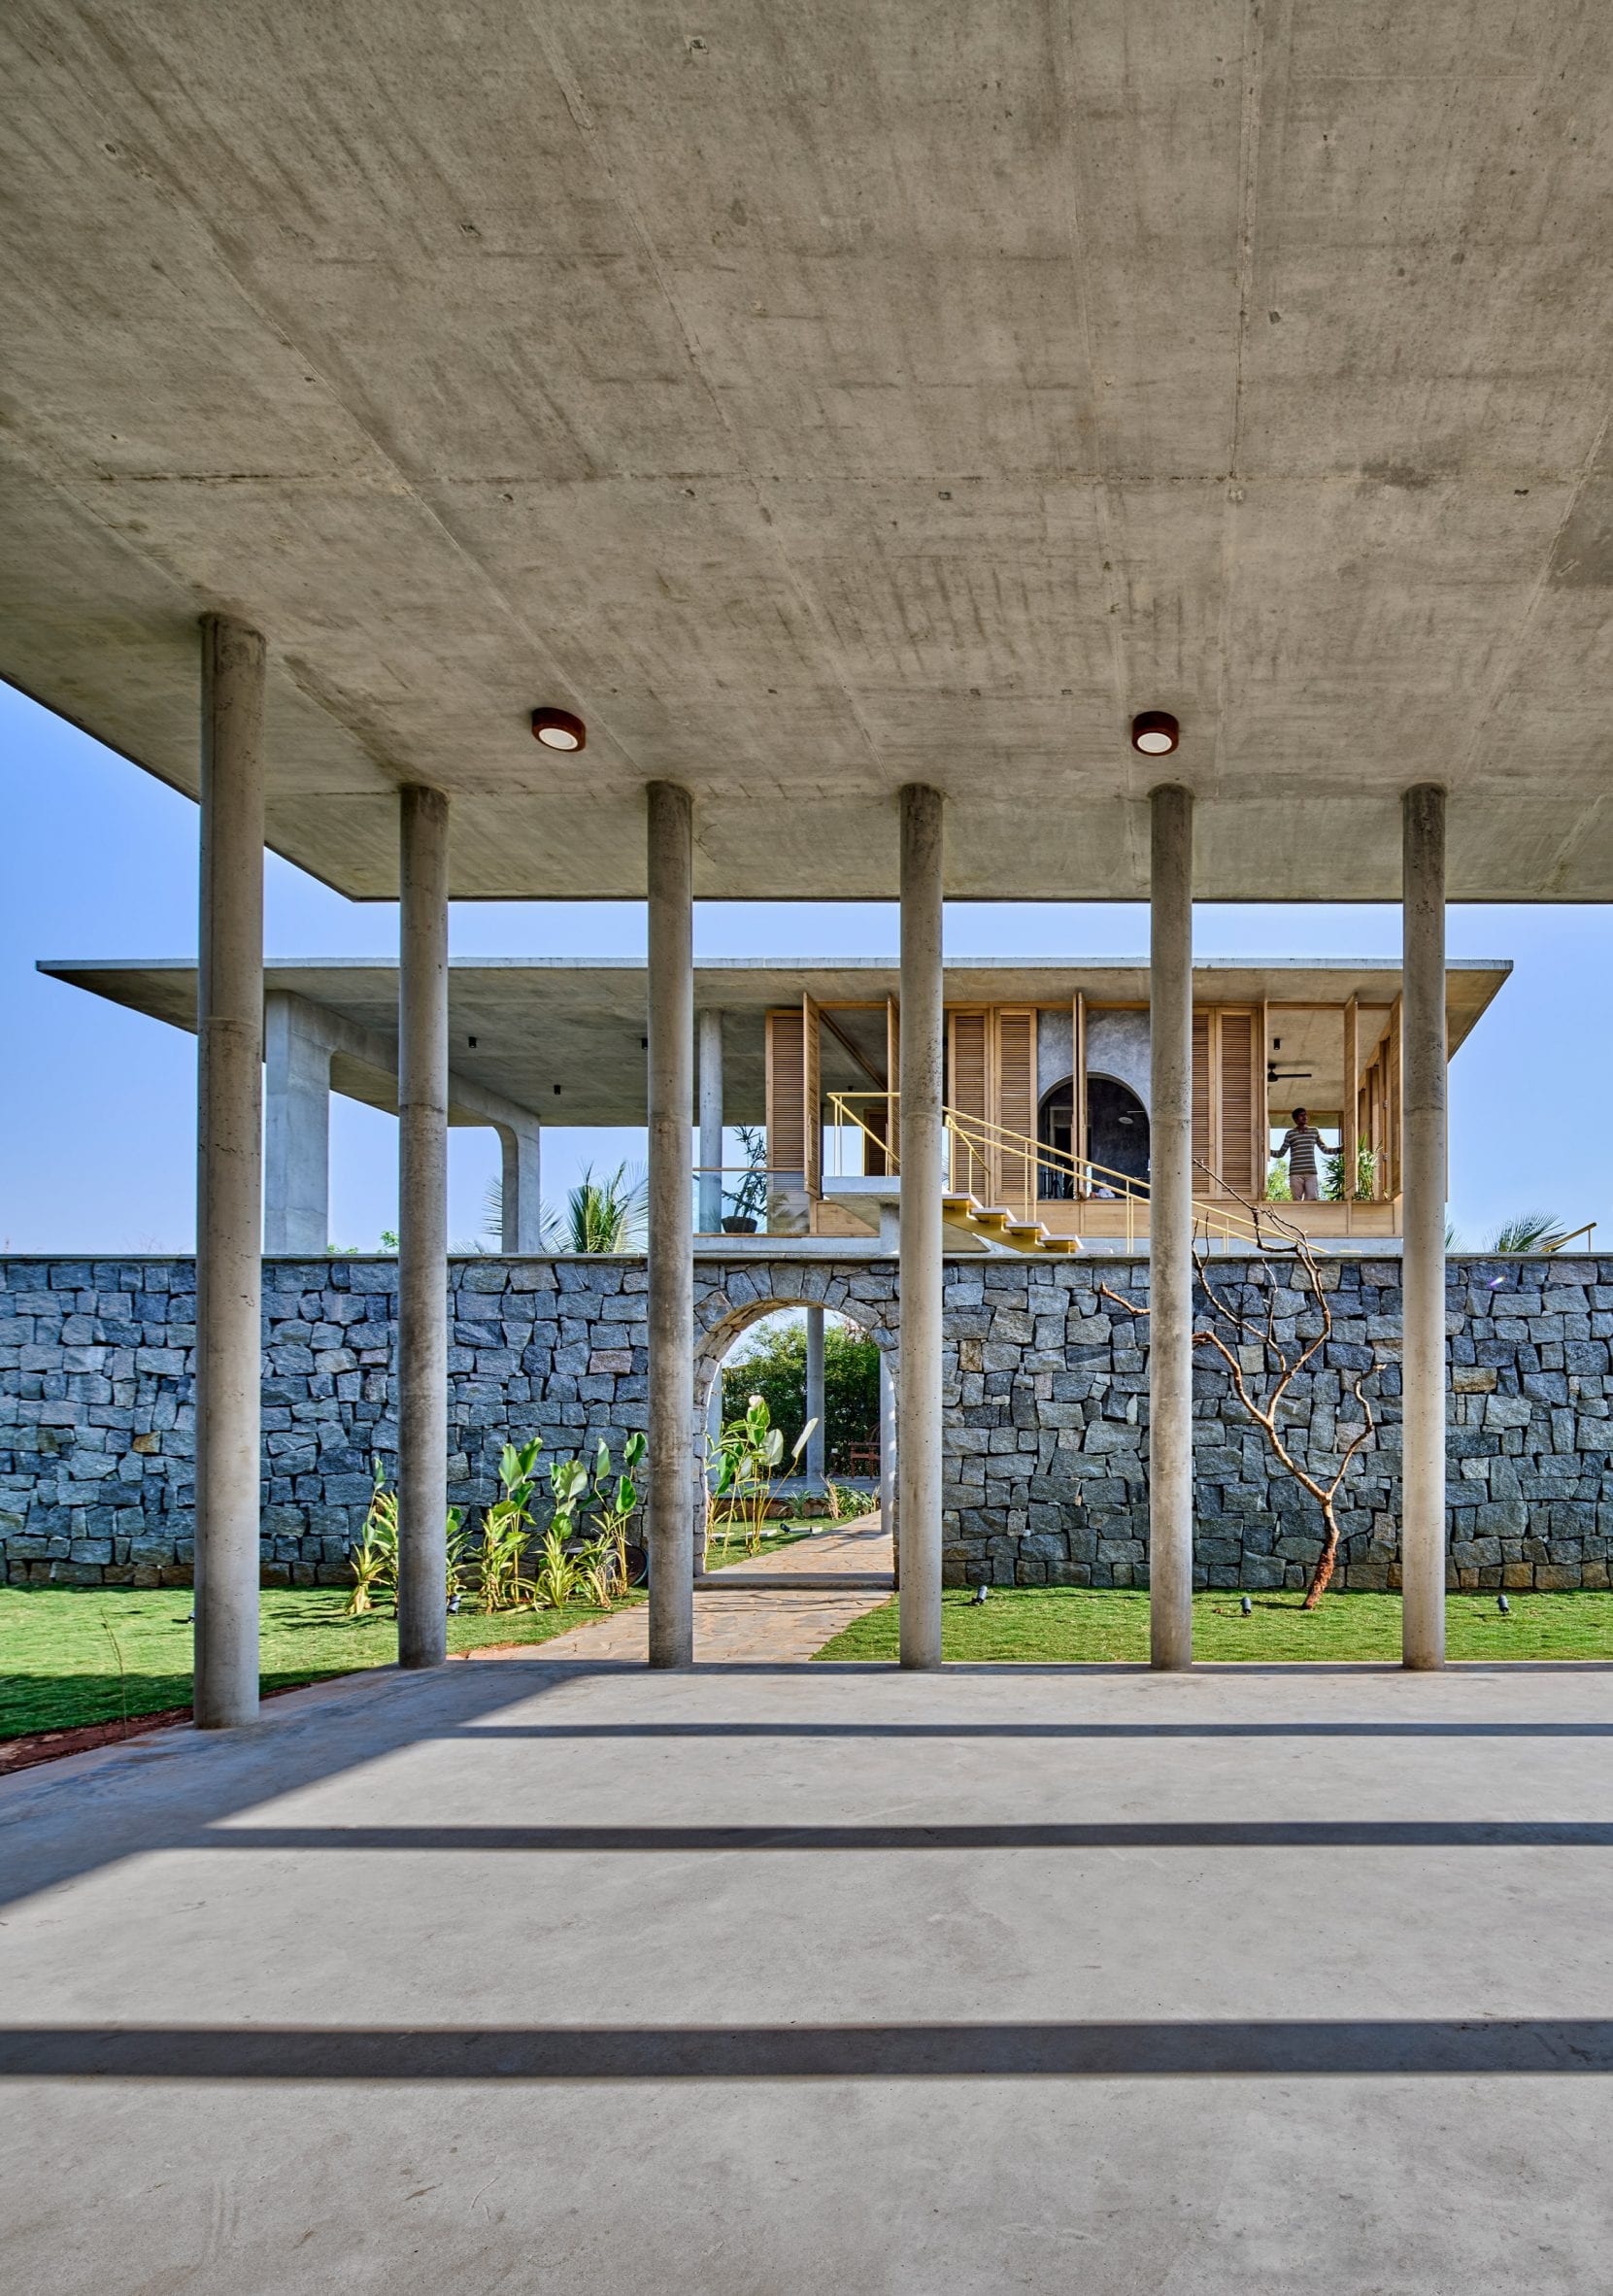 Pavilion of Ksaraah house in Bangalore by Taliesyn